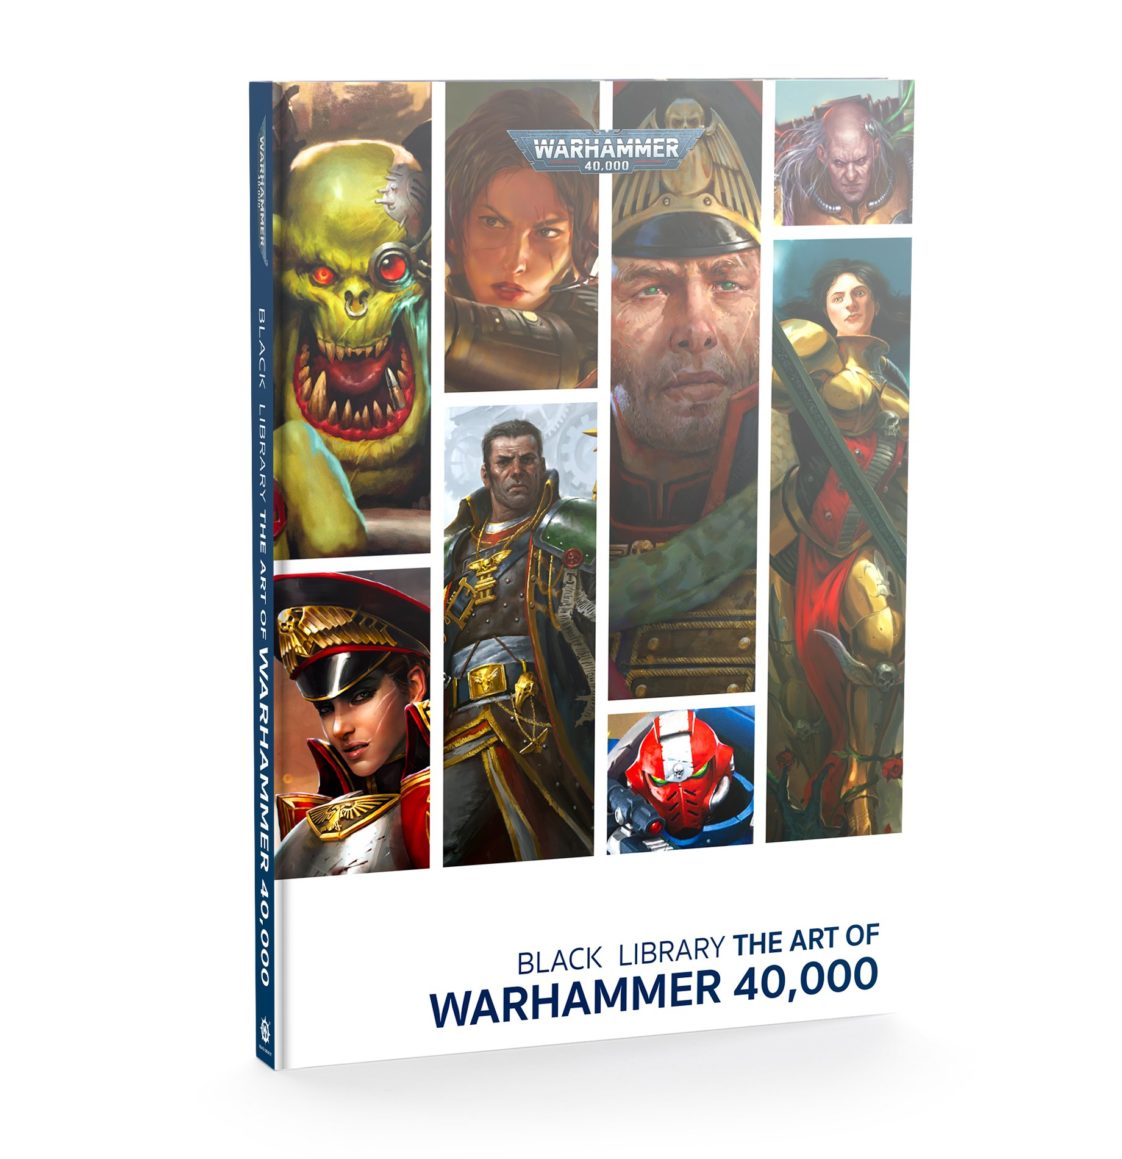 Black Library - The Art of Warhammer 40,000